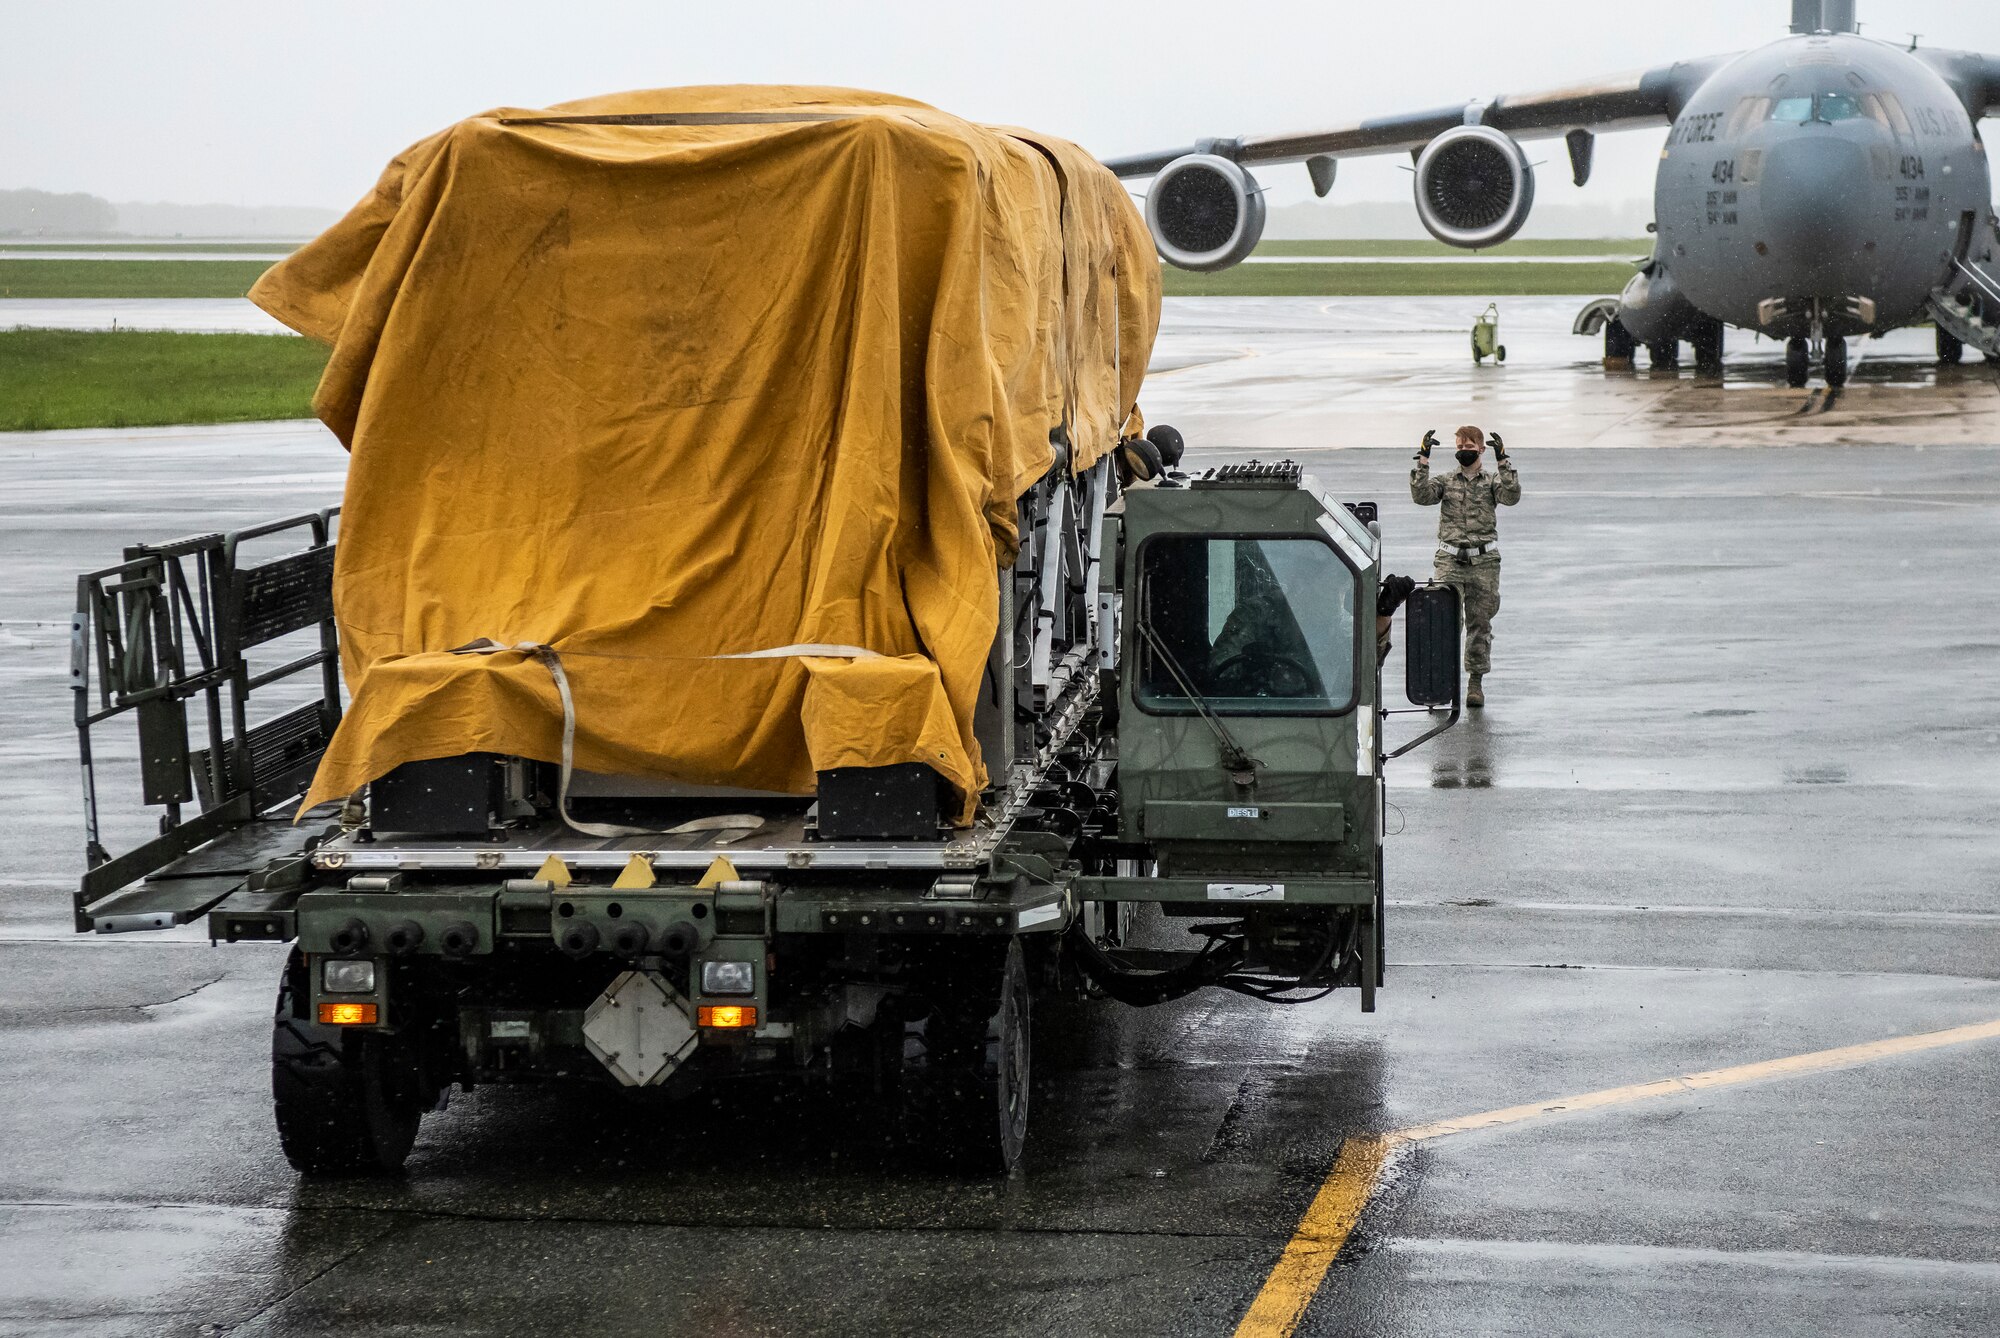 A 436th Aerial Port Squadron Airman guides a K-loader at Dover Air Force Base, Delaware, April 30, 2020. Tarps were placed on top of Transport Isolation Systems due to inclement weather at Dover AFB. In accordance with health protection policies, Dover AFB will serve as the sole hub for TIS decontamination on the East Coast. (U.S. Air Force photo by Senior Airman Christopher Quail)